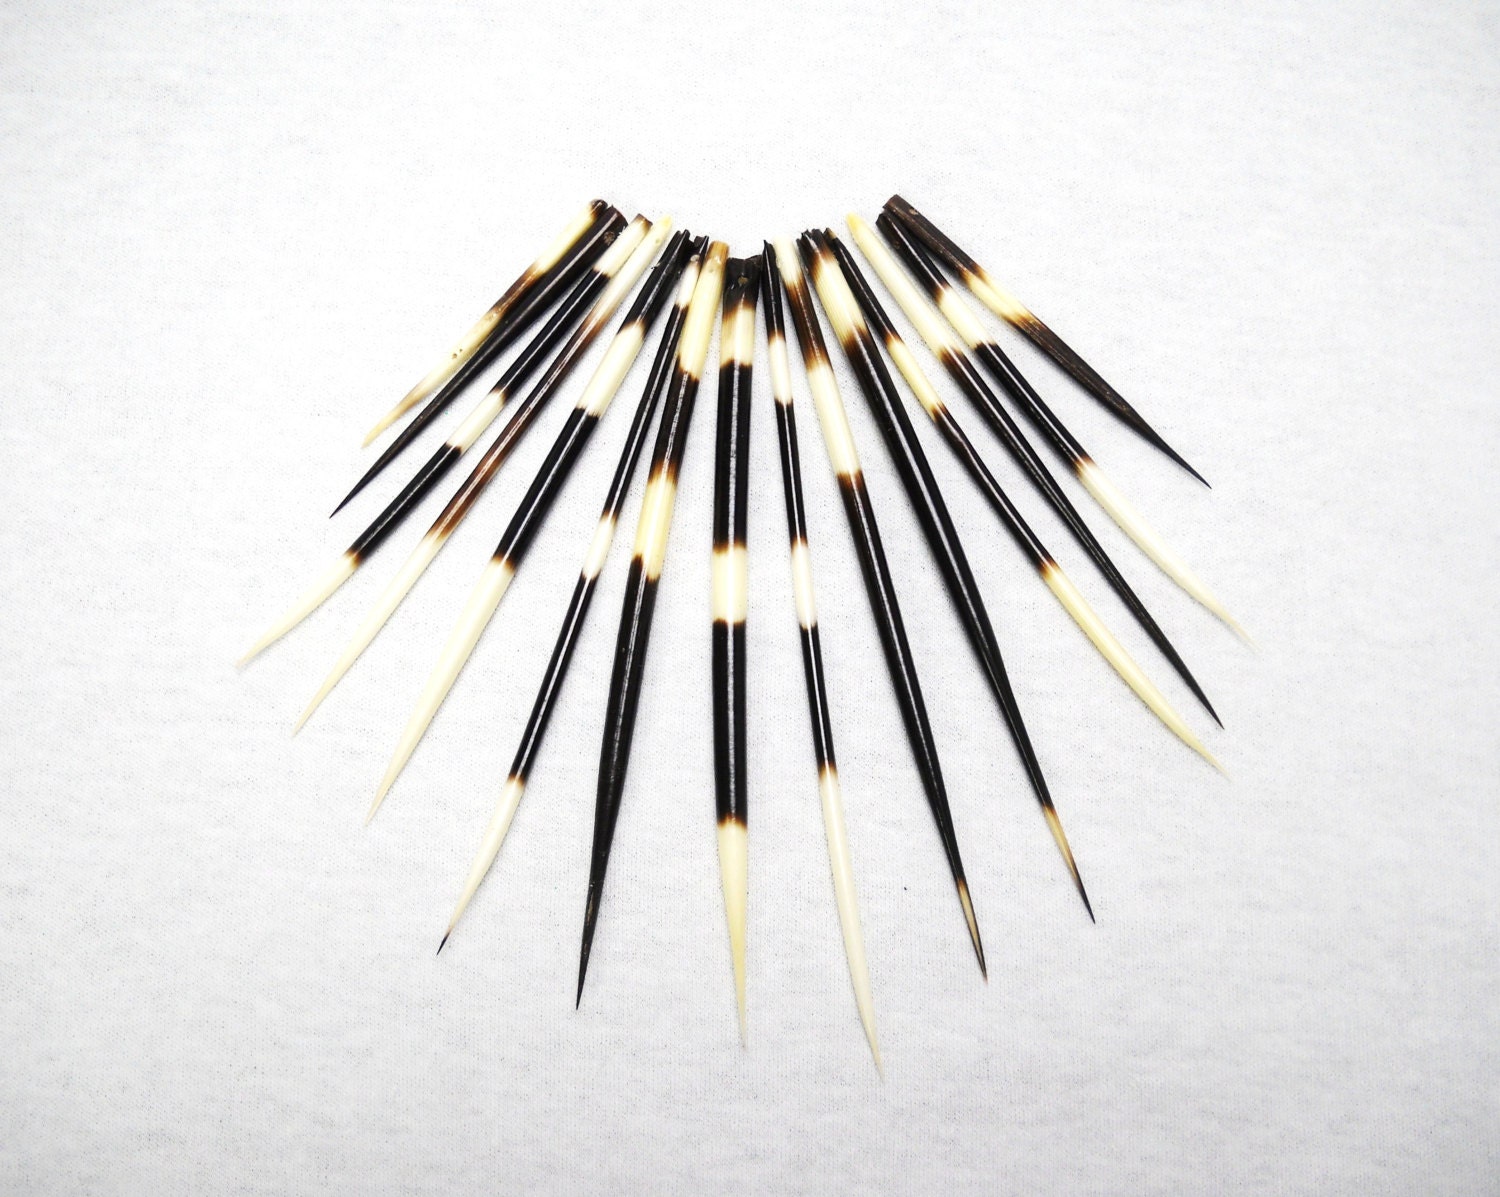 Could Porcupine Quills Help Us Design the Next Hypodermic Needle